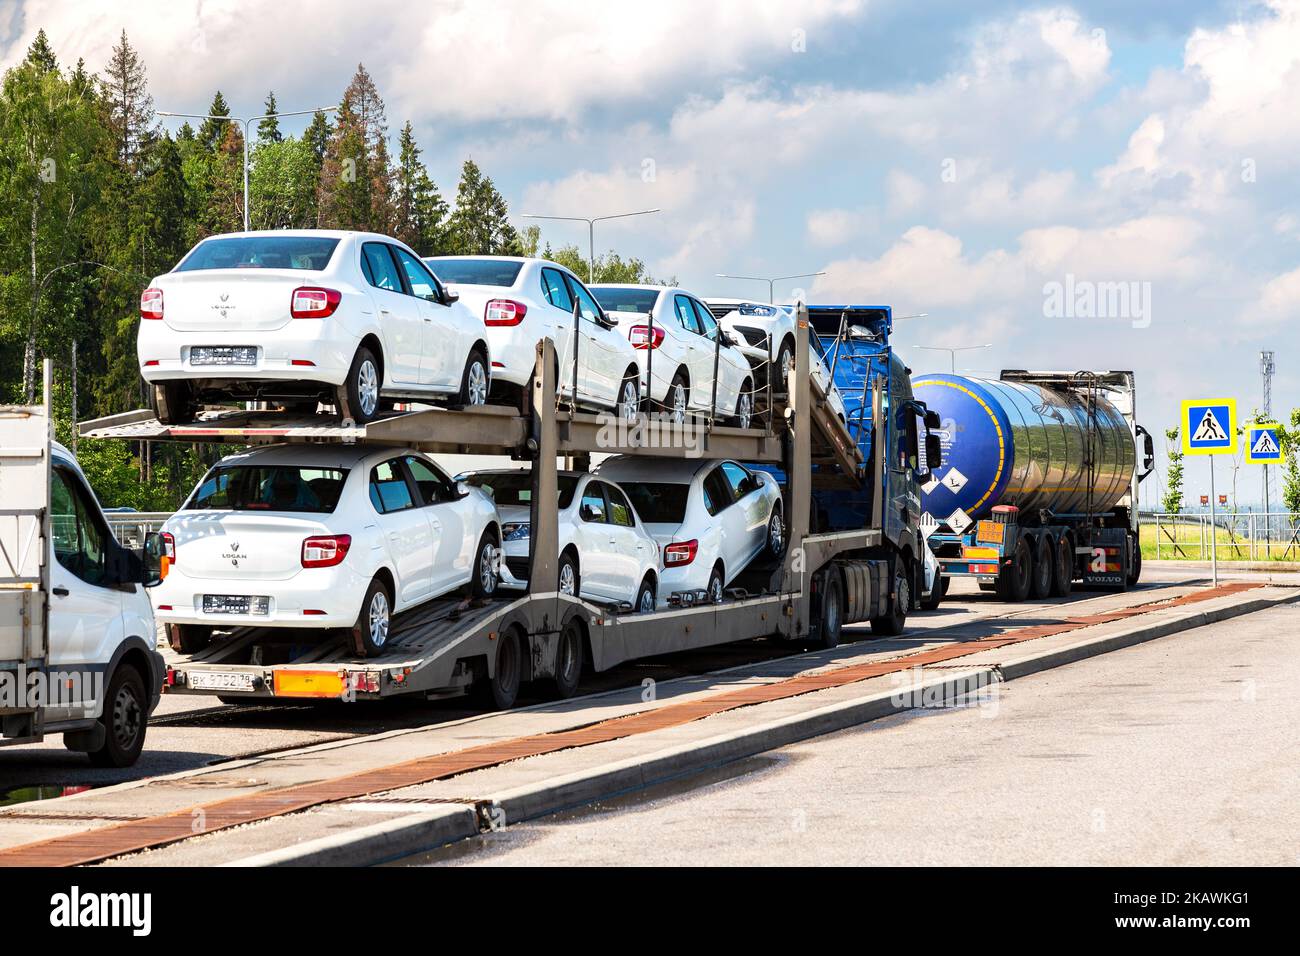 Moscow, Russia - July 12, 2022: Car transporter carries new Renault vehicles along the highway. Car carrier transporter truck on a freeway Stock Photo